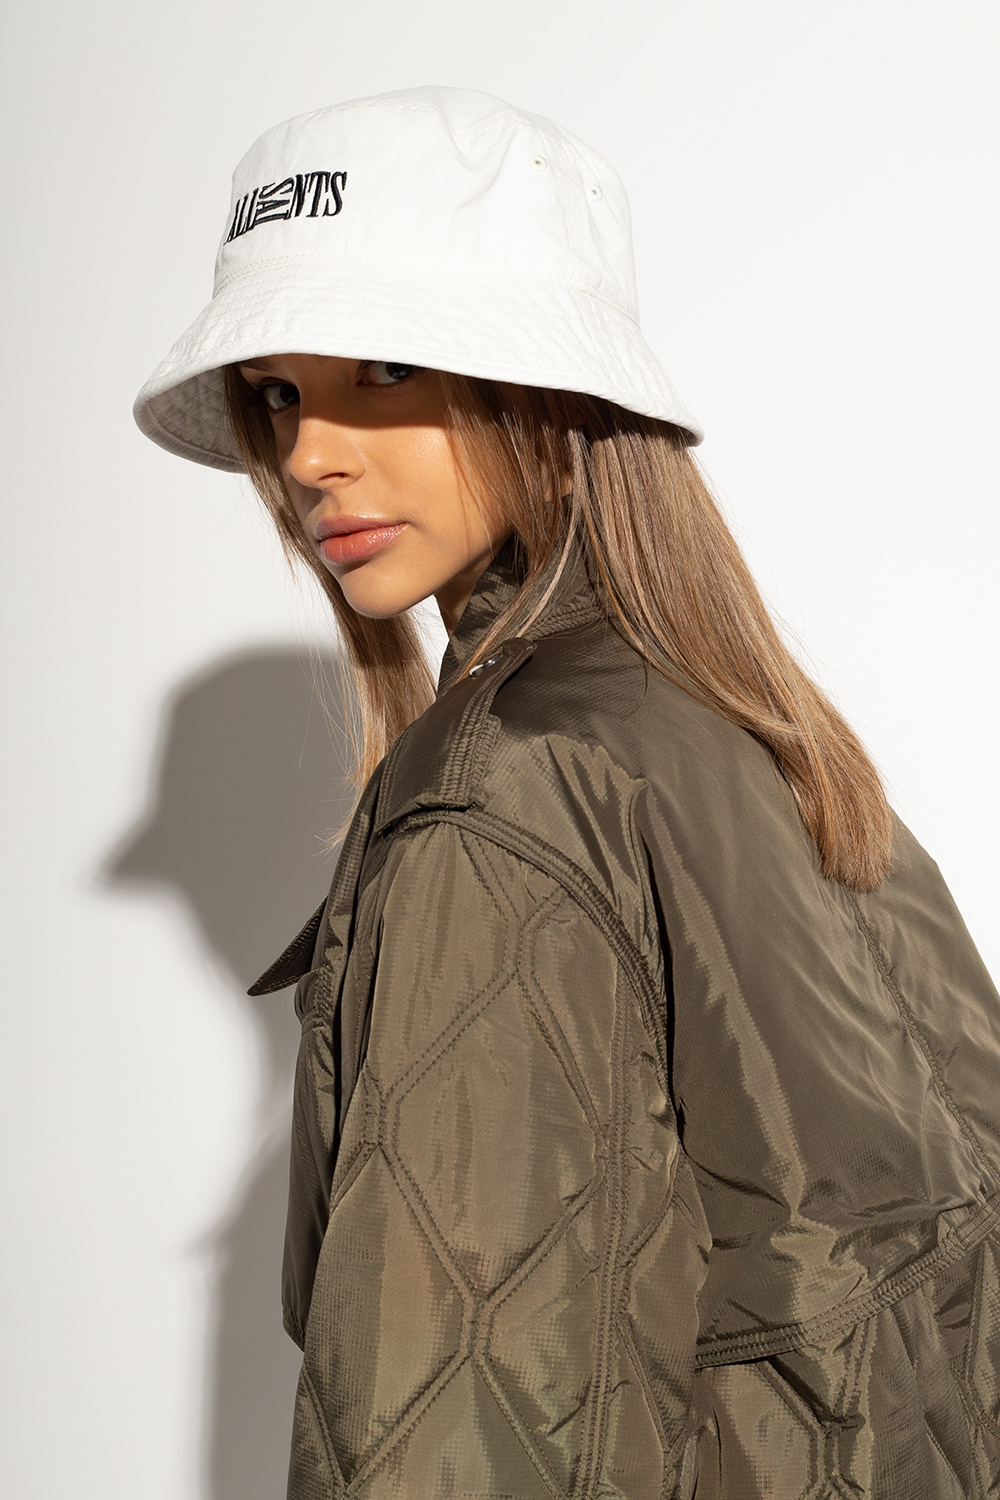 AllSaints ‘Oppose’ Reversible hat with logo